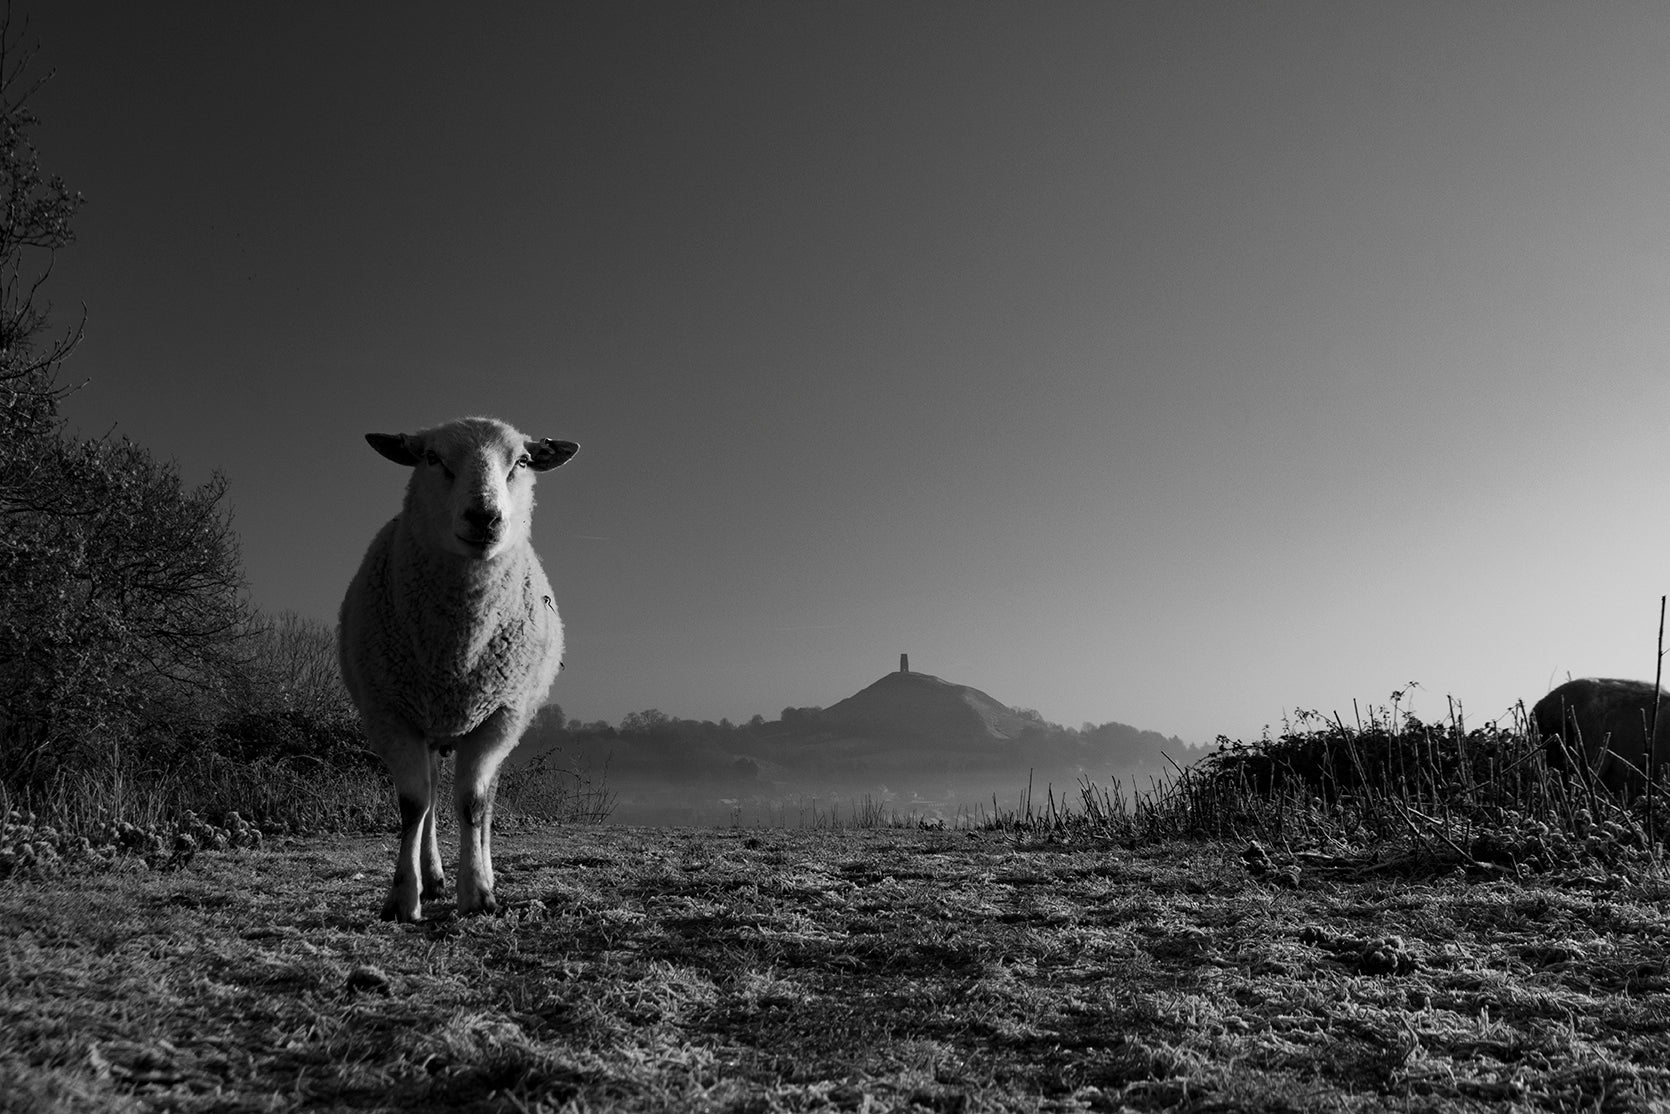 A sheep standing in front of the hazy Glastonbury Tor - England